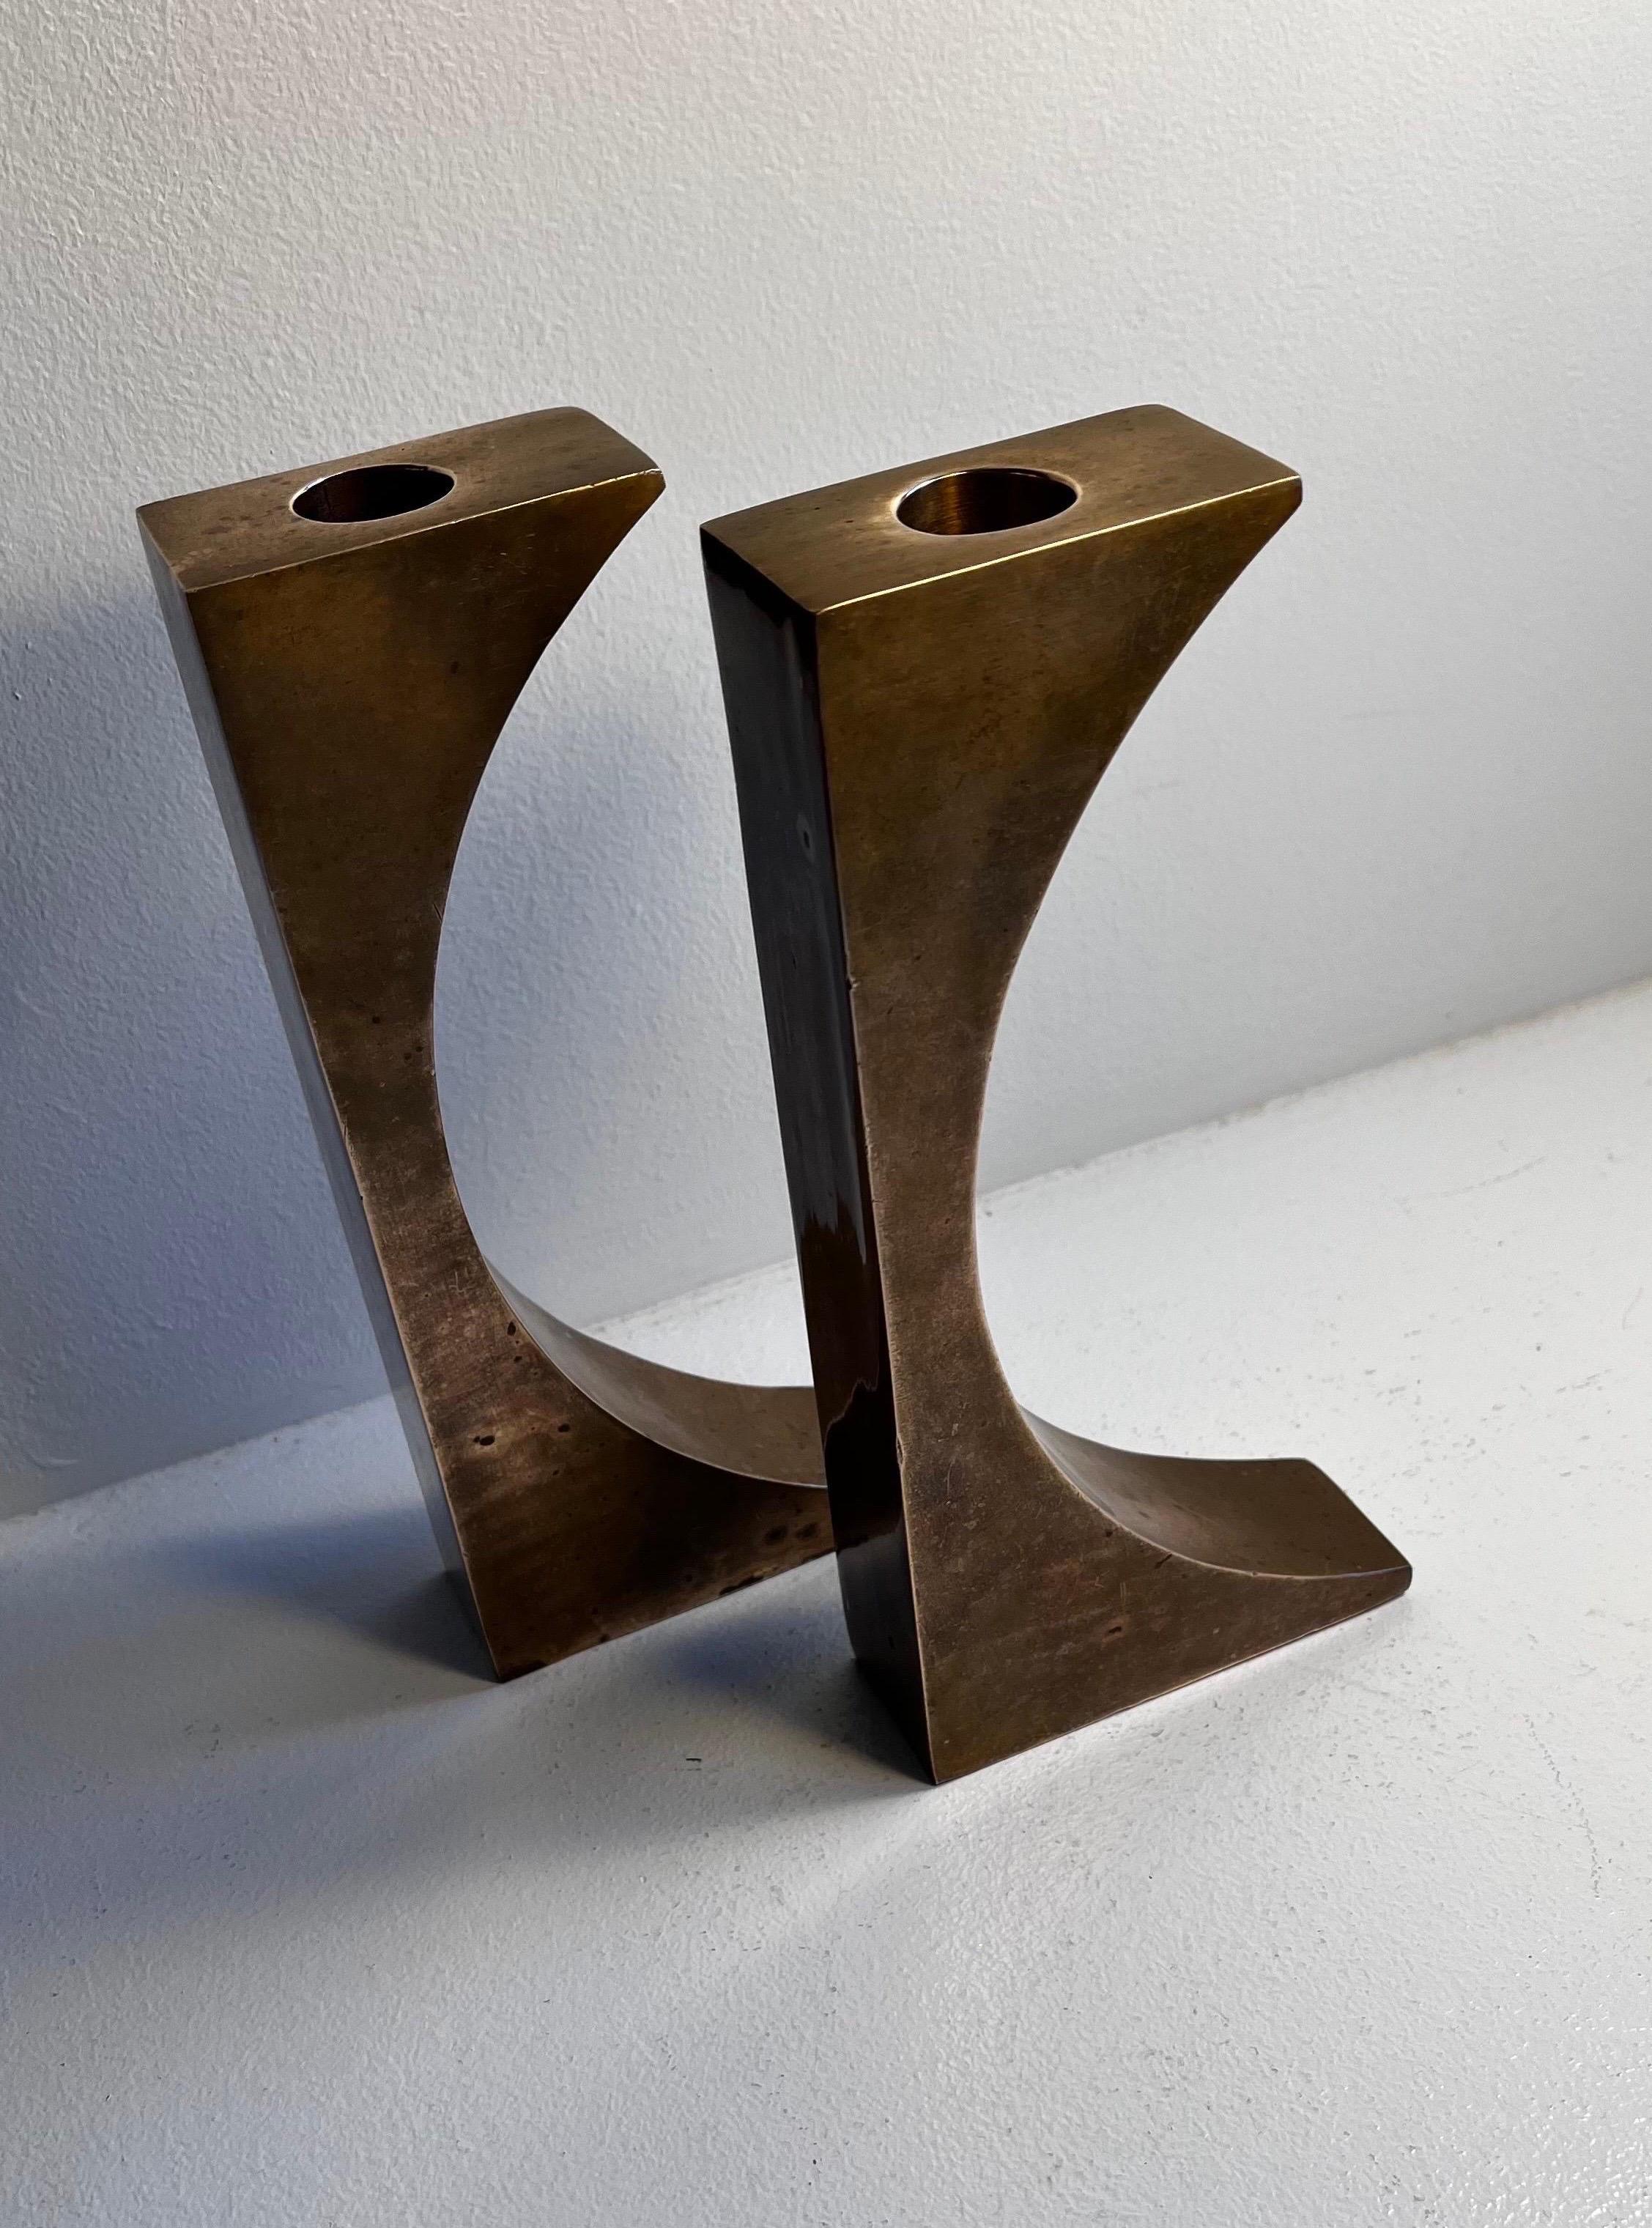 Futurist Pair of  Bronze Candlesticks or Bookends in the style M. Gerber, c 1970